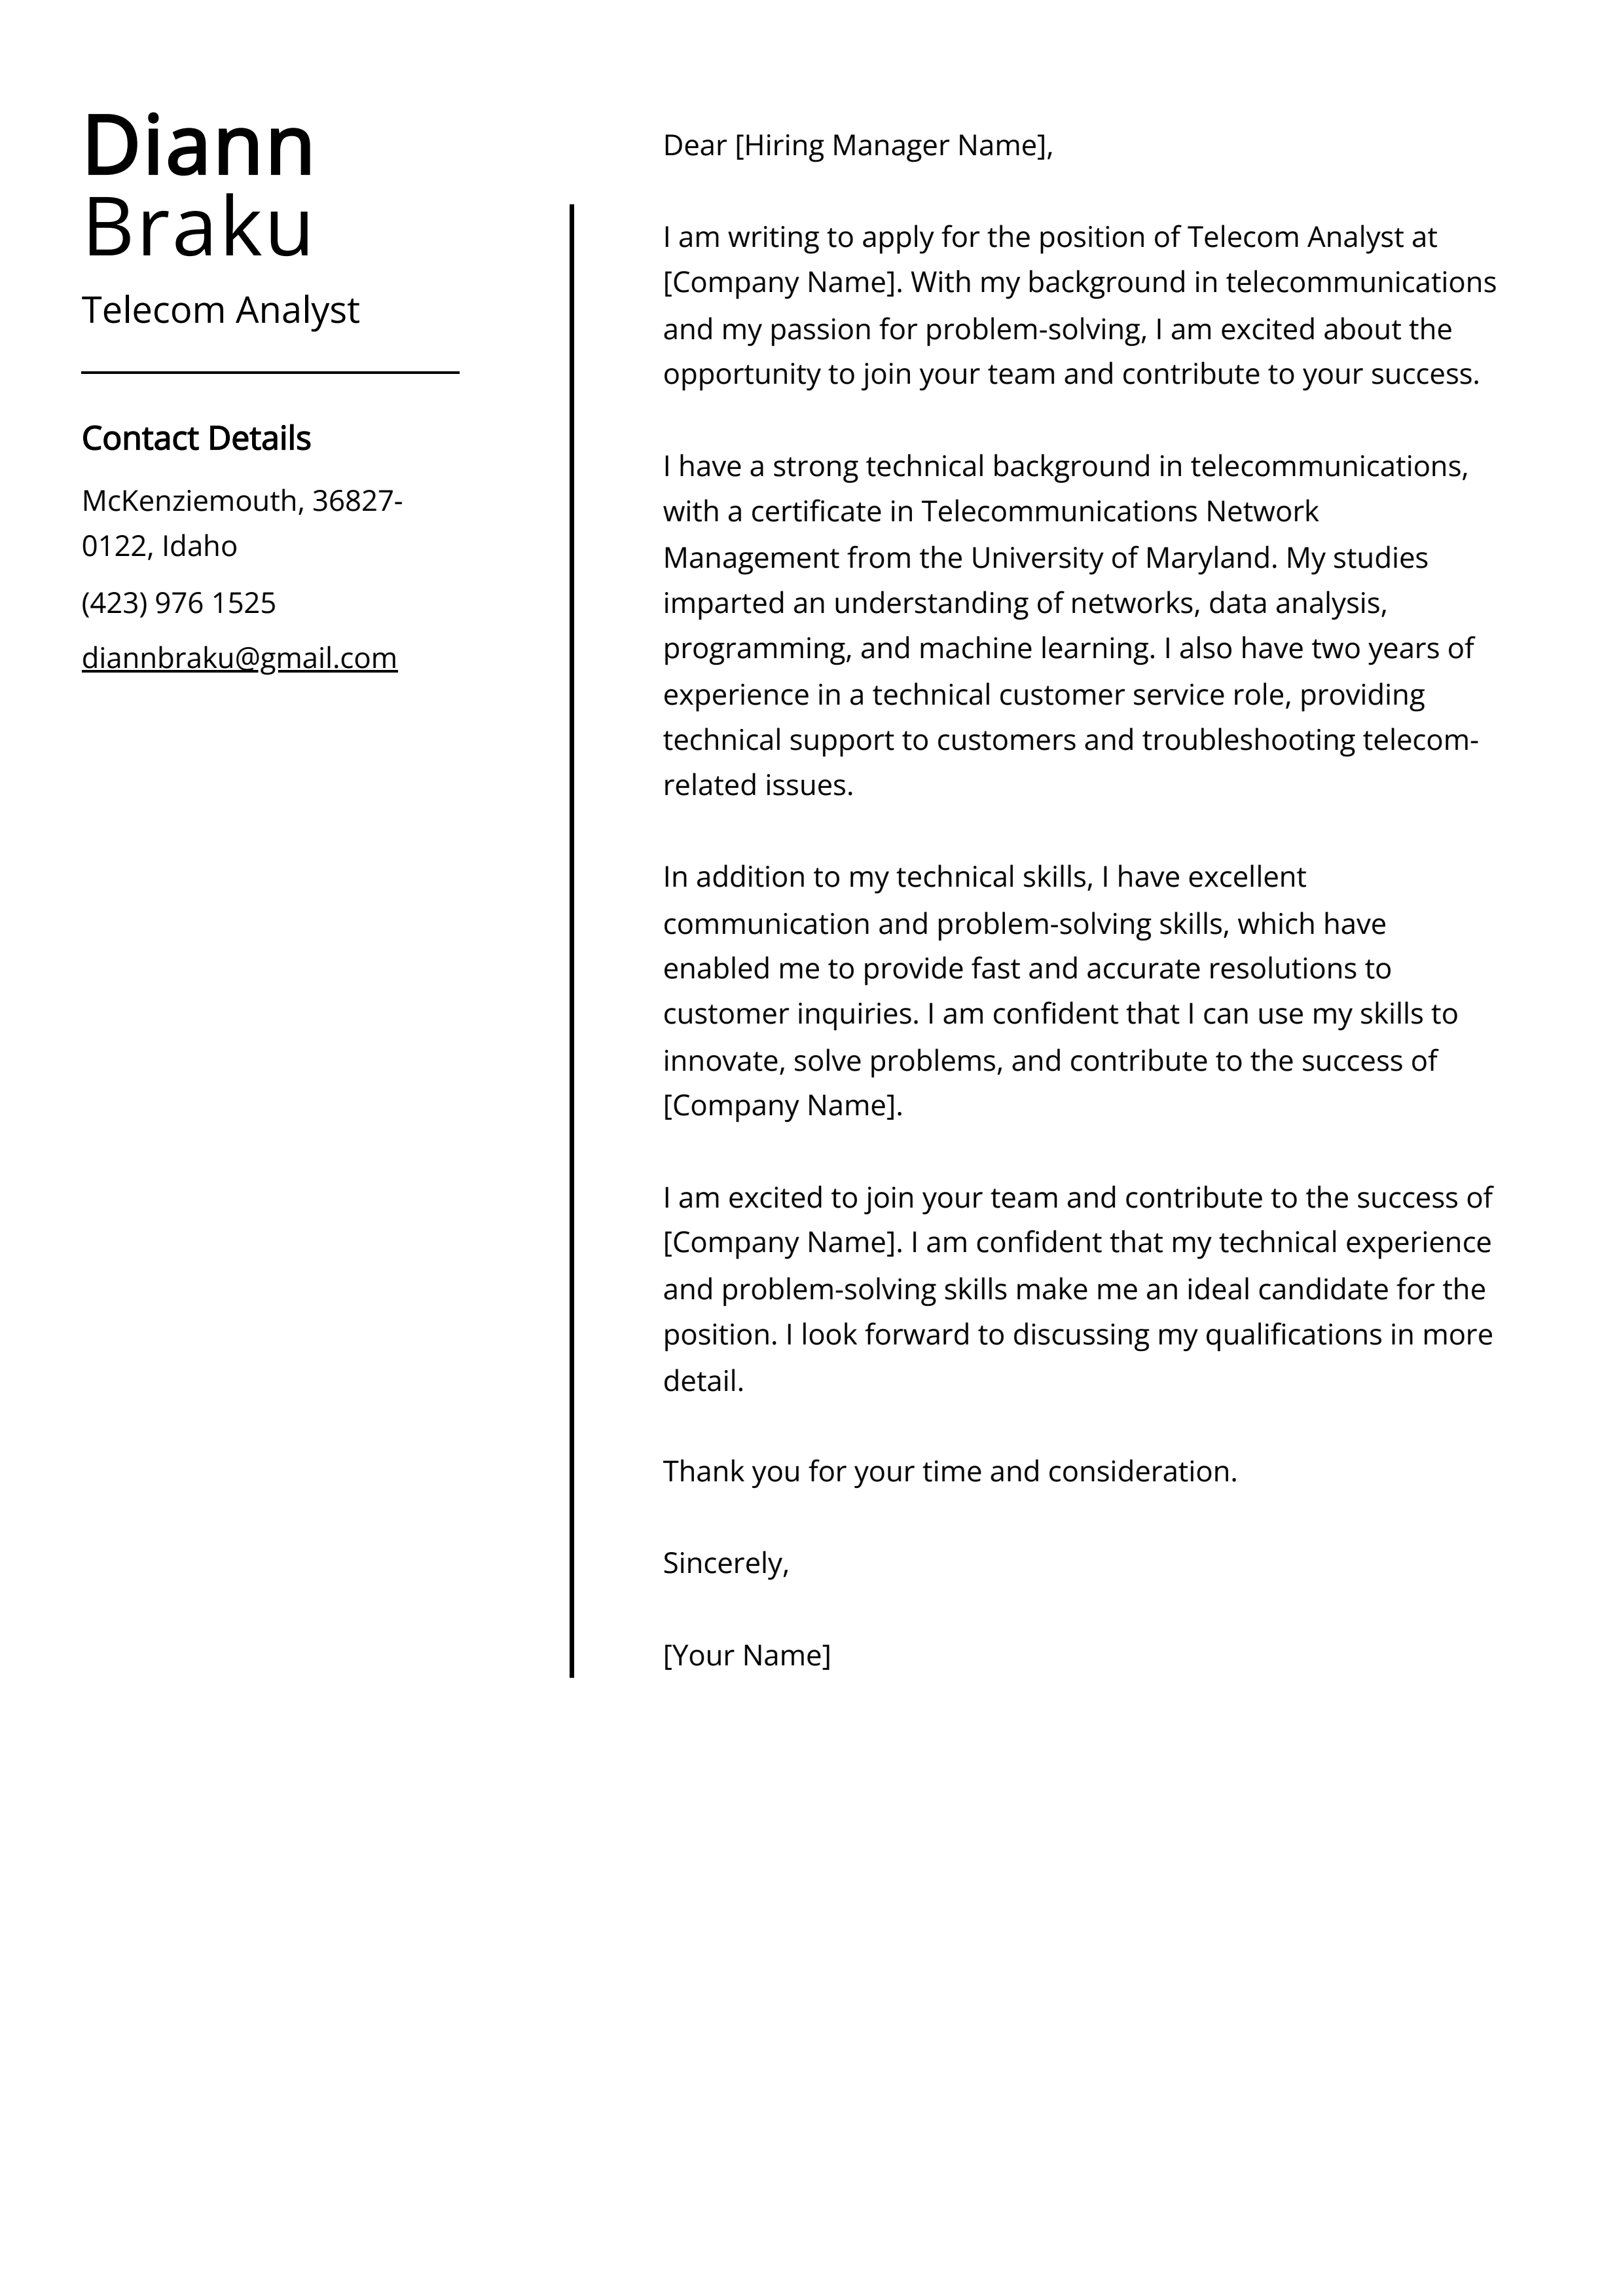 Telecom Analyst Cover Letter Example